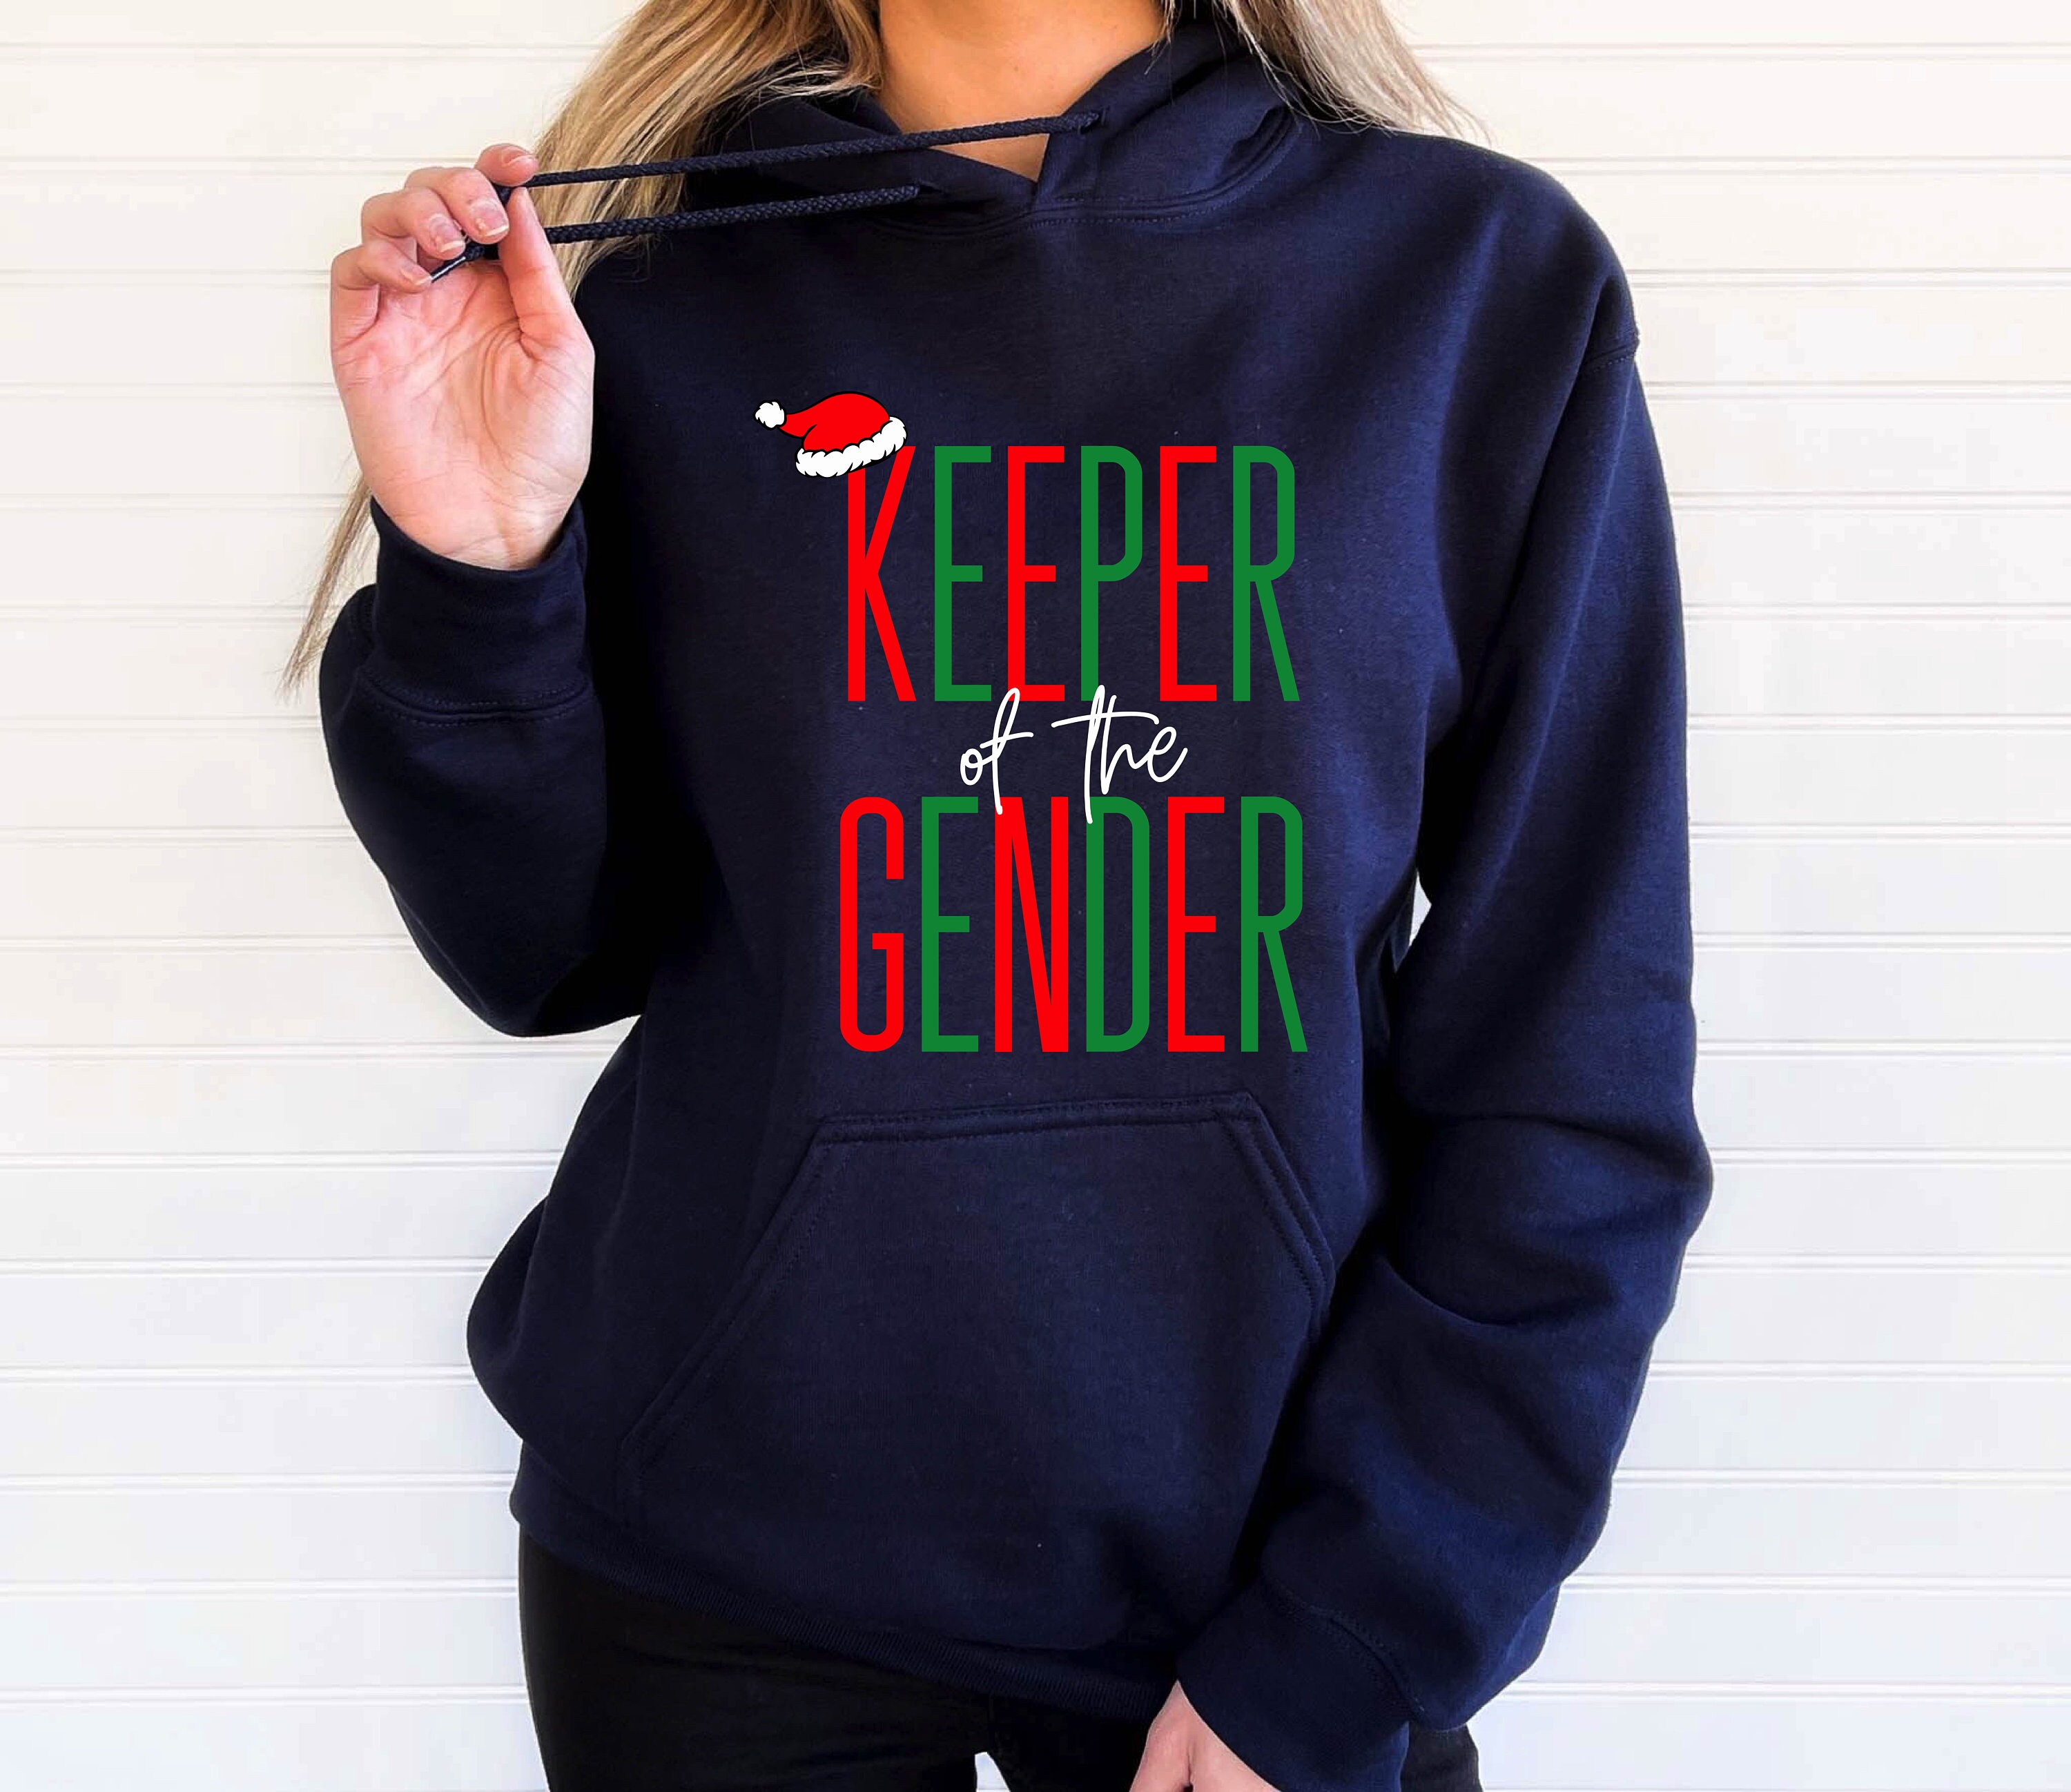 Discover Christmas Keeper Of The Gender Sweatshirt, Christmas Baby Announcement